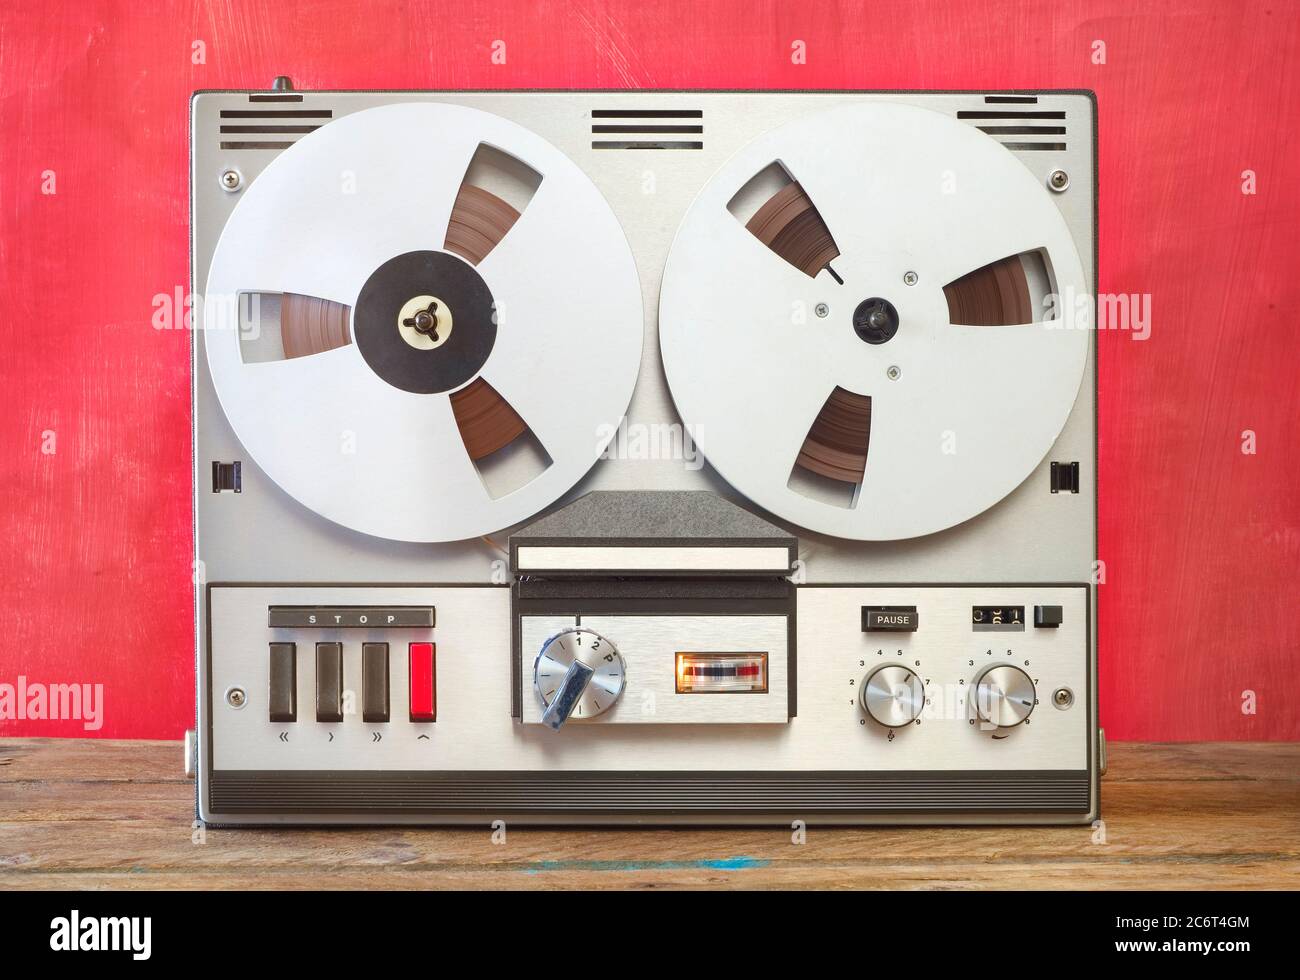 Vintage analog open reel to reel tape recorder dated from the